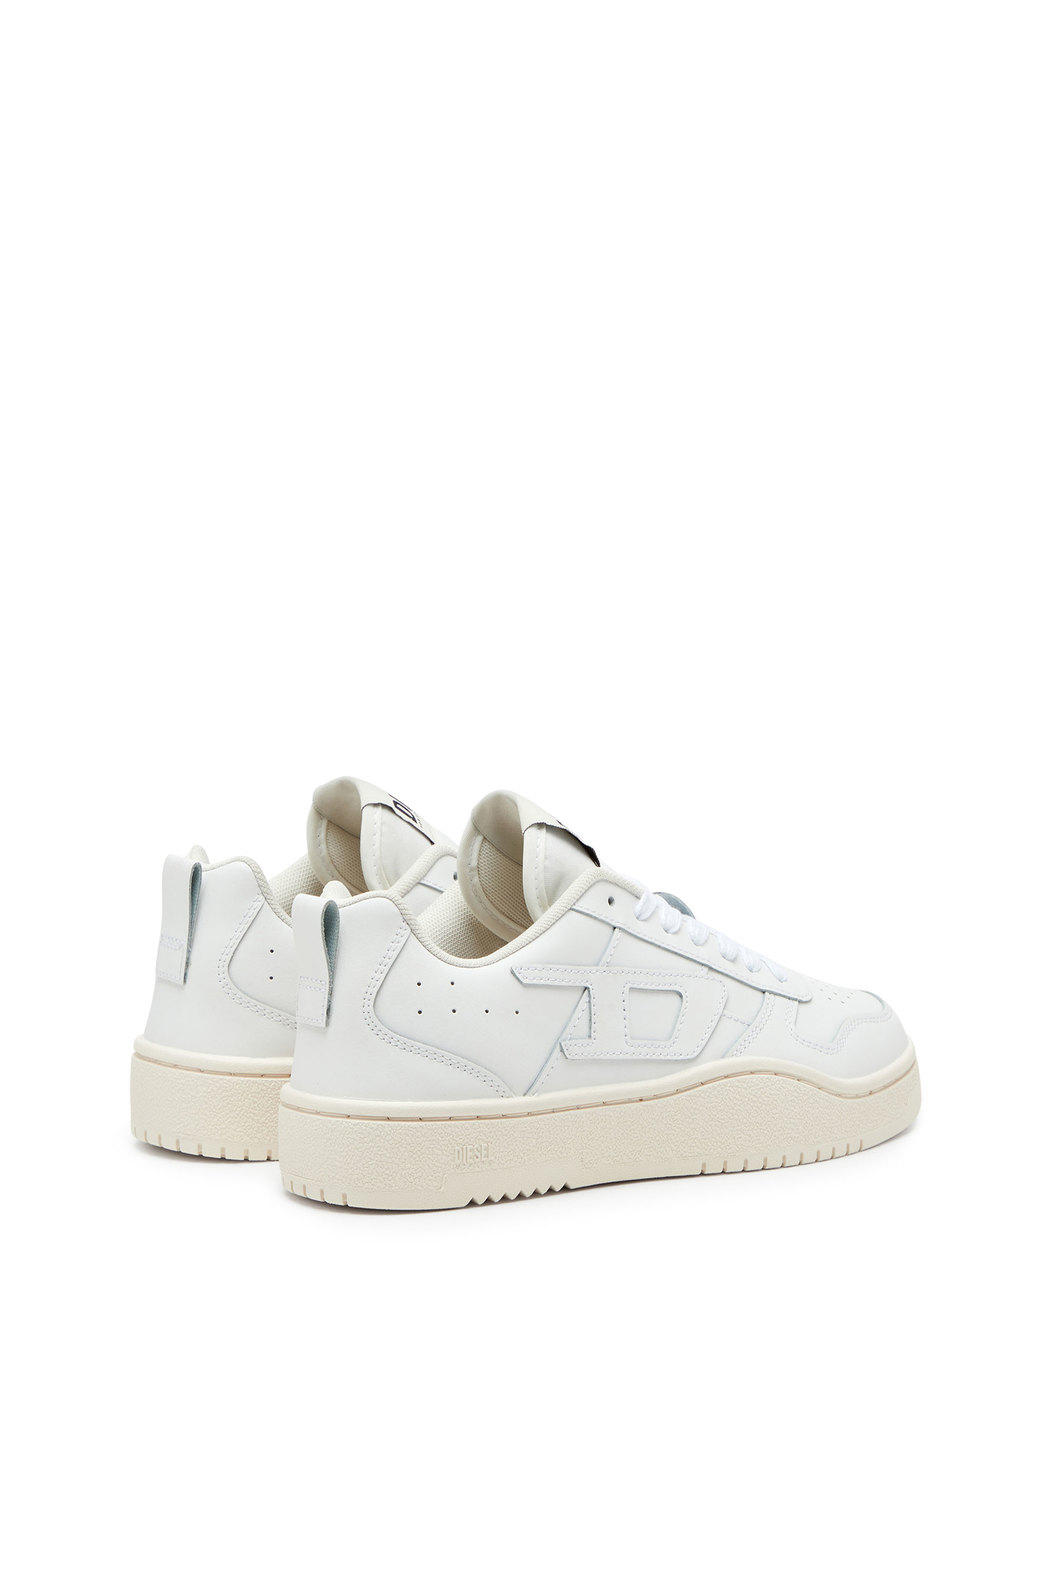 S-Ukiyo V2 Low W - Low-top sneakers in leather and nylon